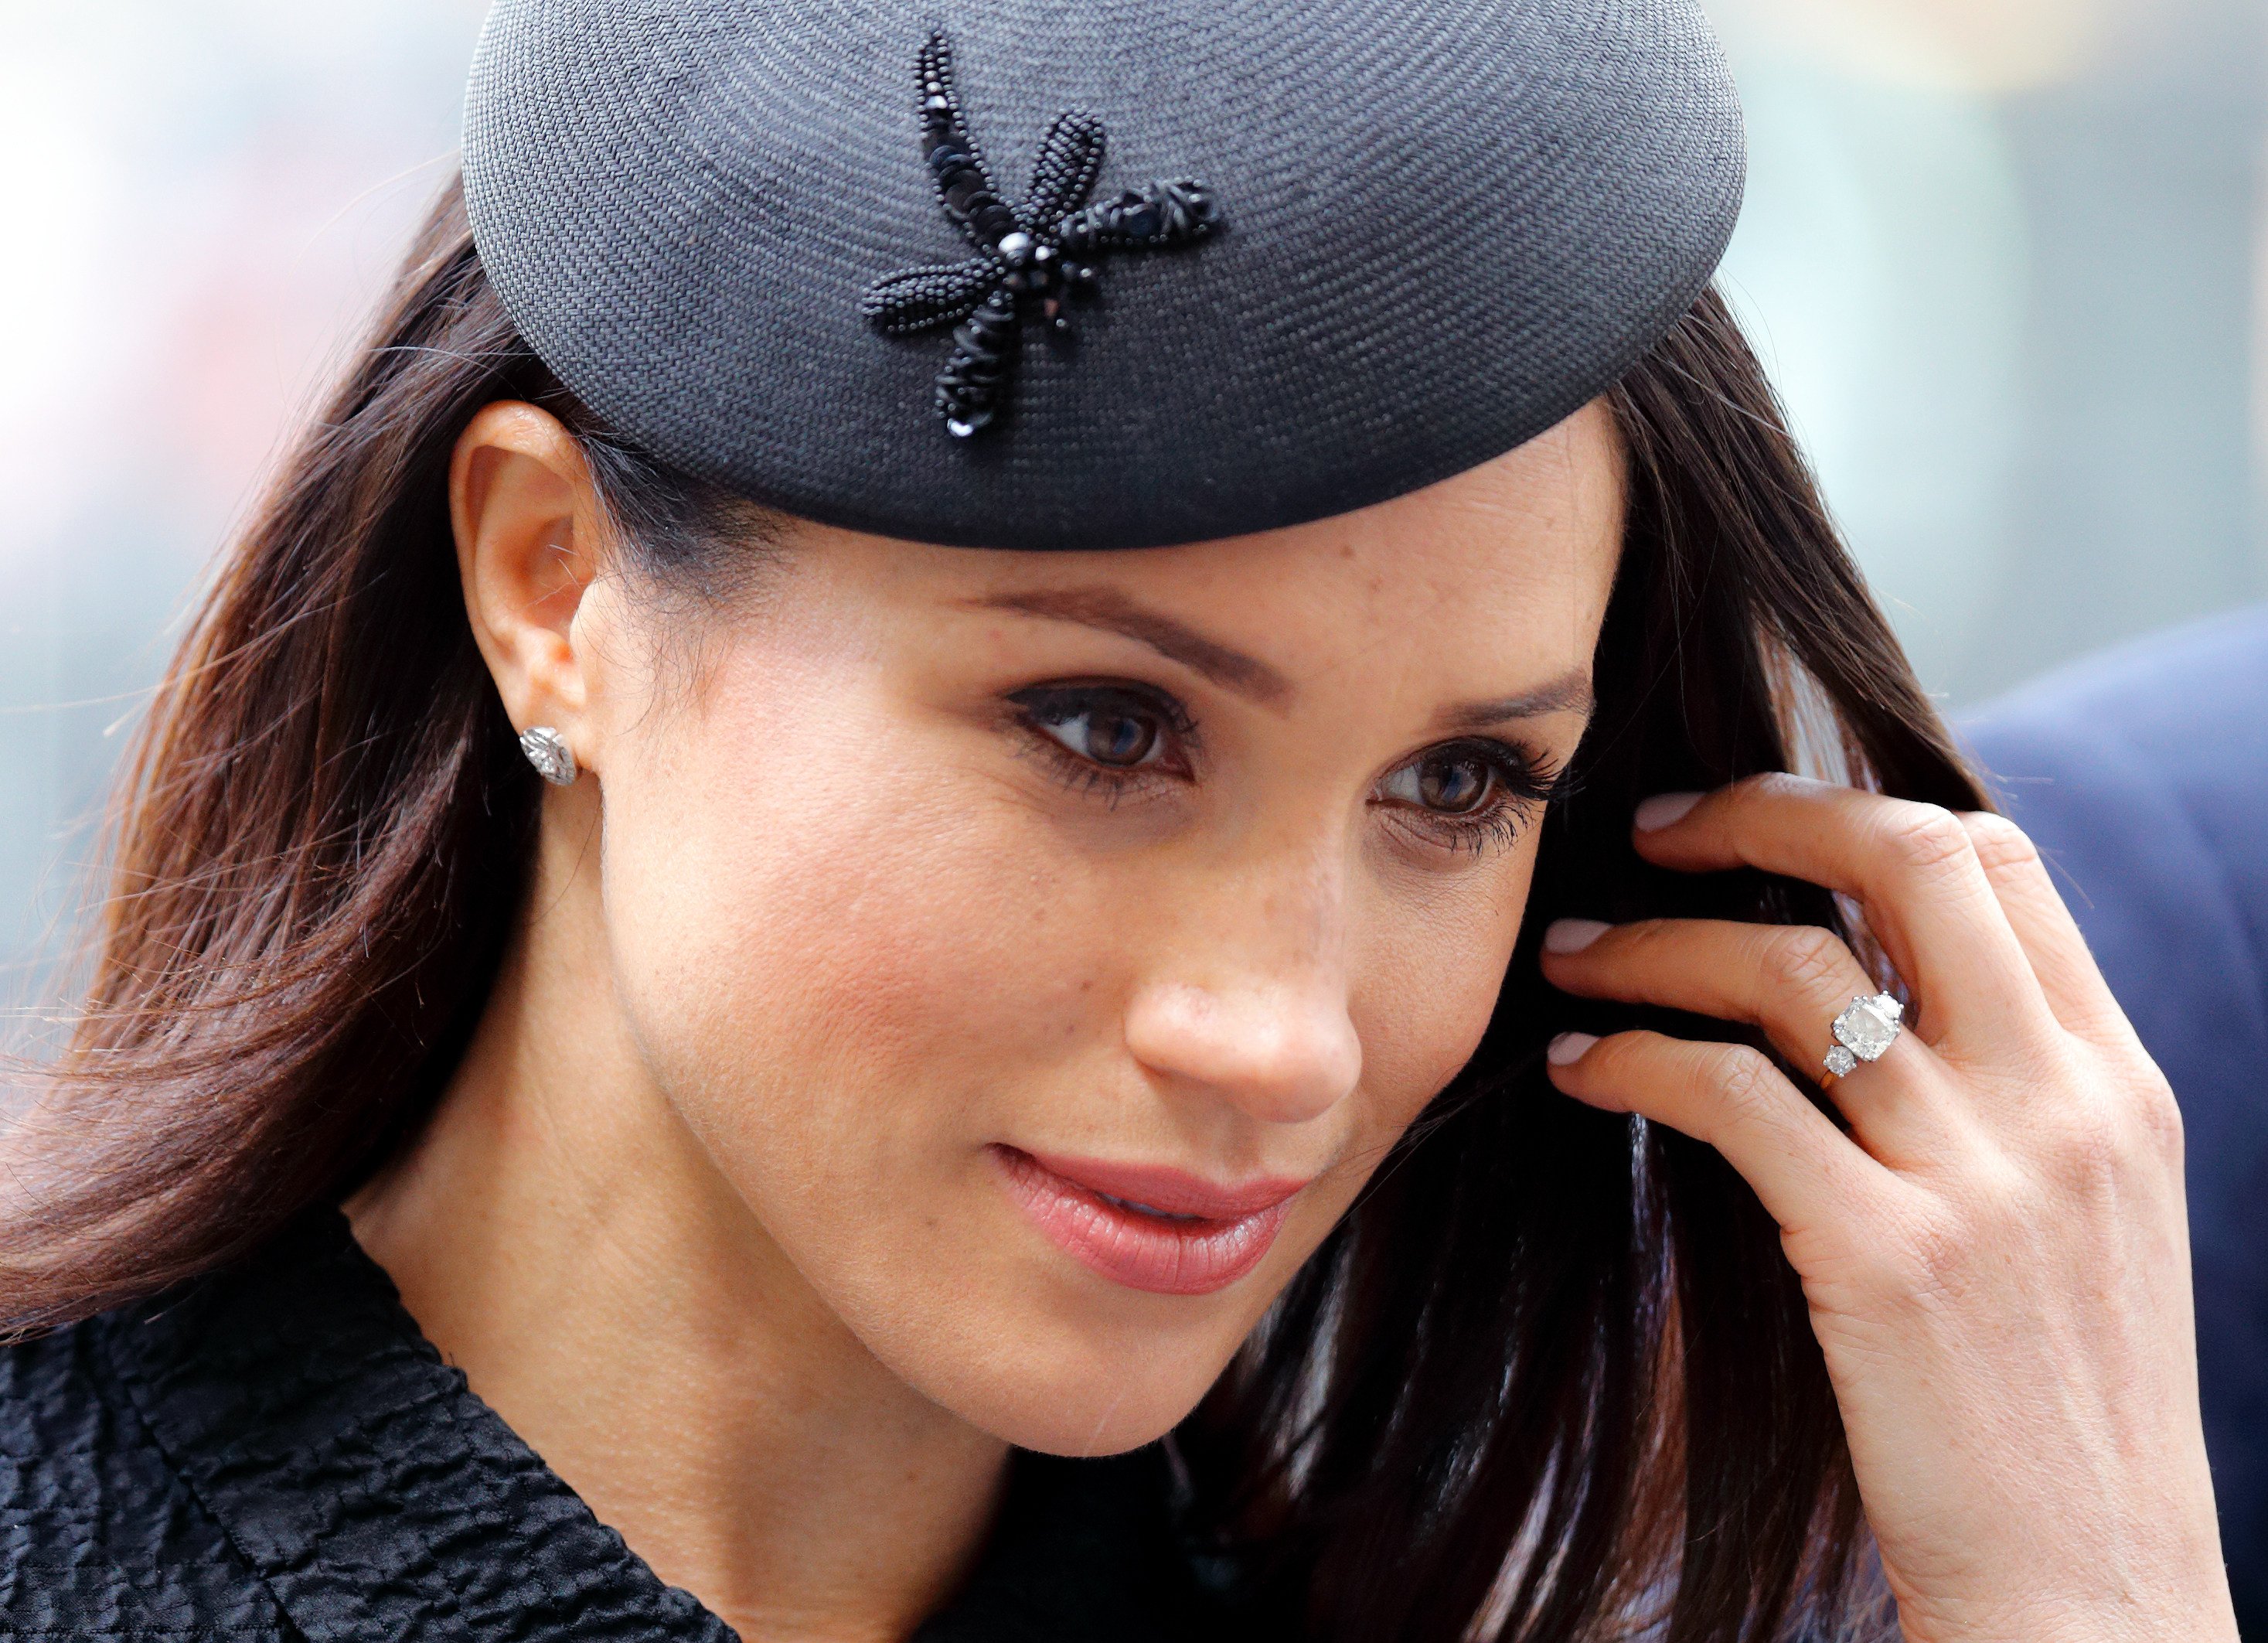 Meghan Markle shows off her modified engagement ring at an Anzac Day service at Westminster Abbey in April 2018 in London. Photo: Indigo/Getty Images